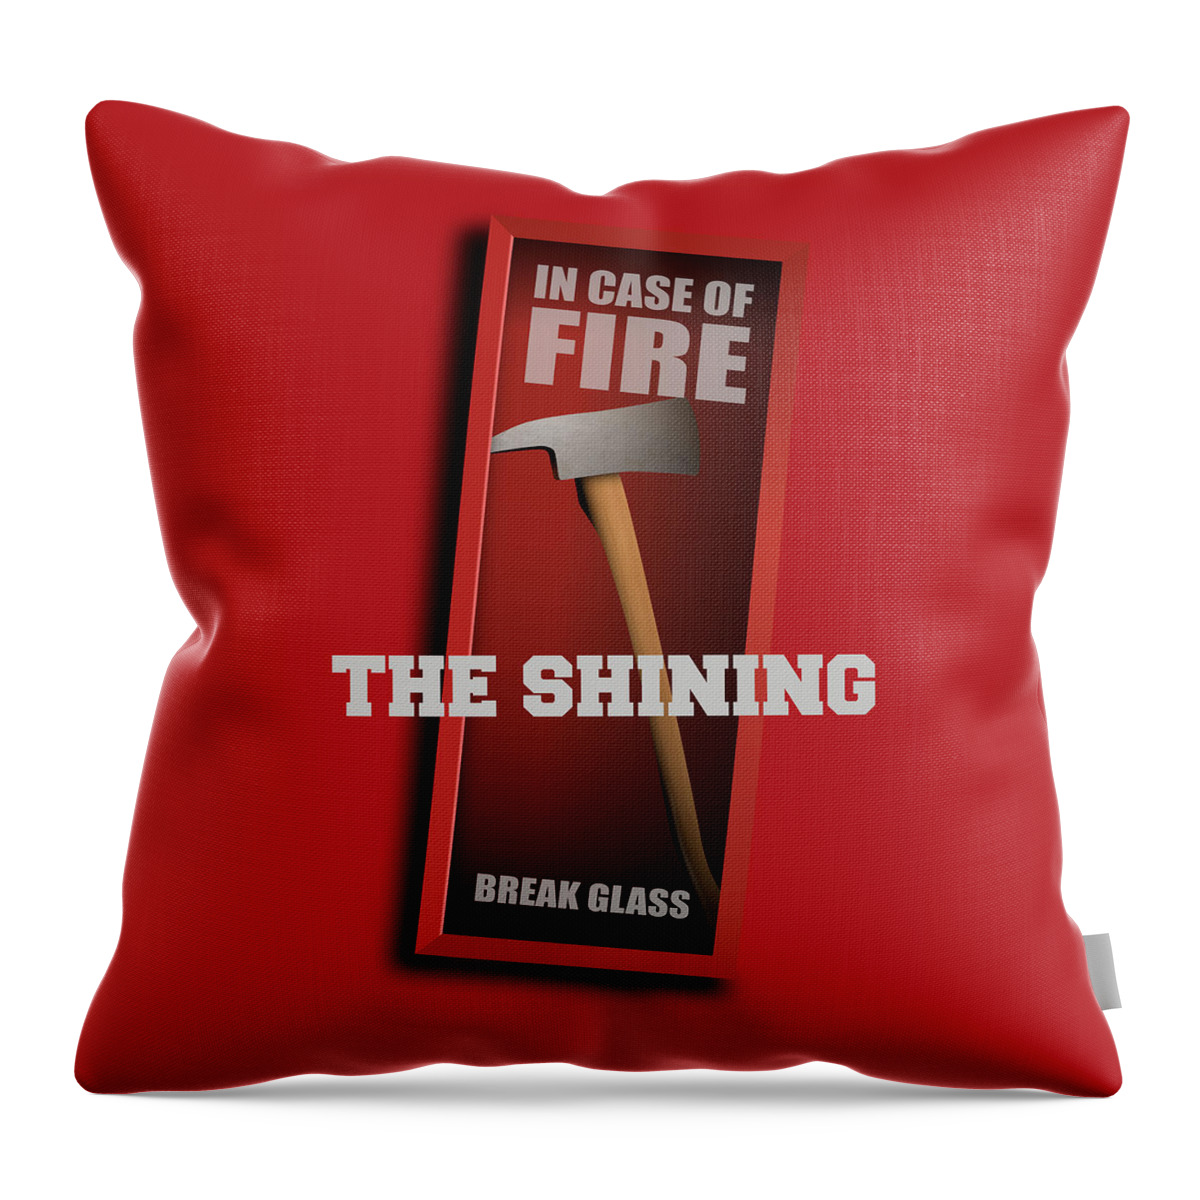 The Shining Throw Pillow featuring the digital art The Shining - Alternative Movie Poster by Movie Poster Boy